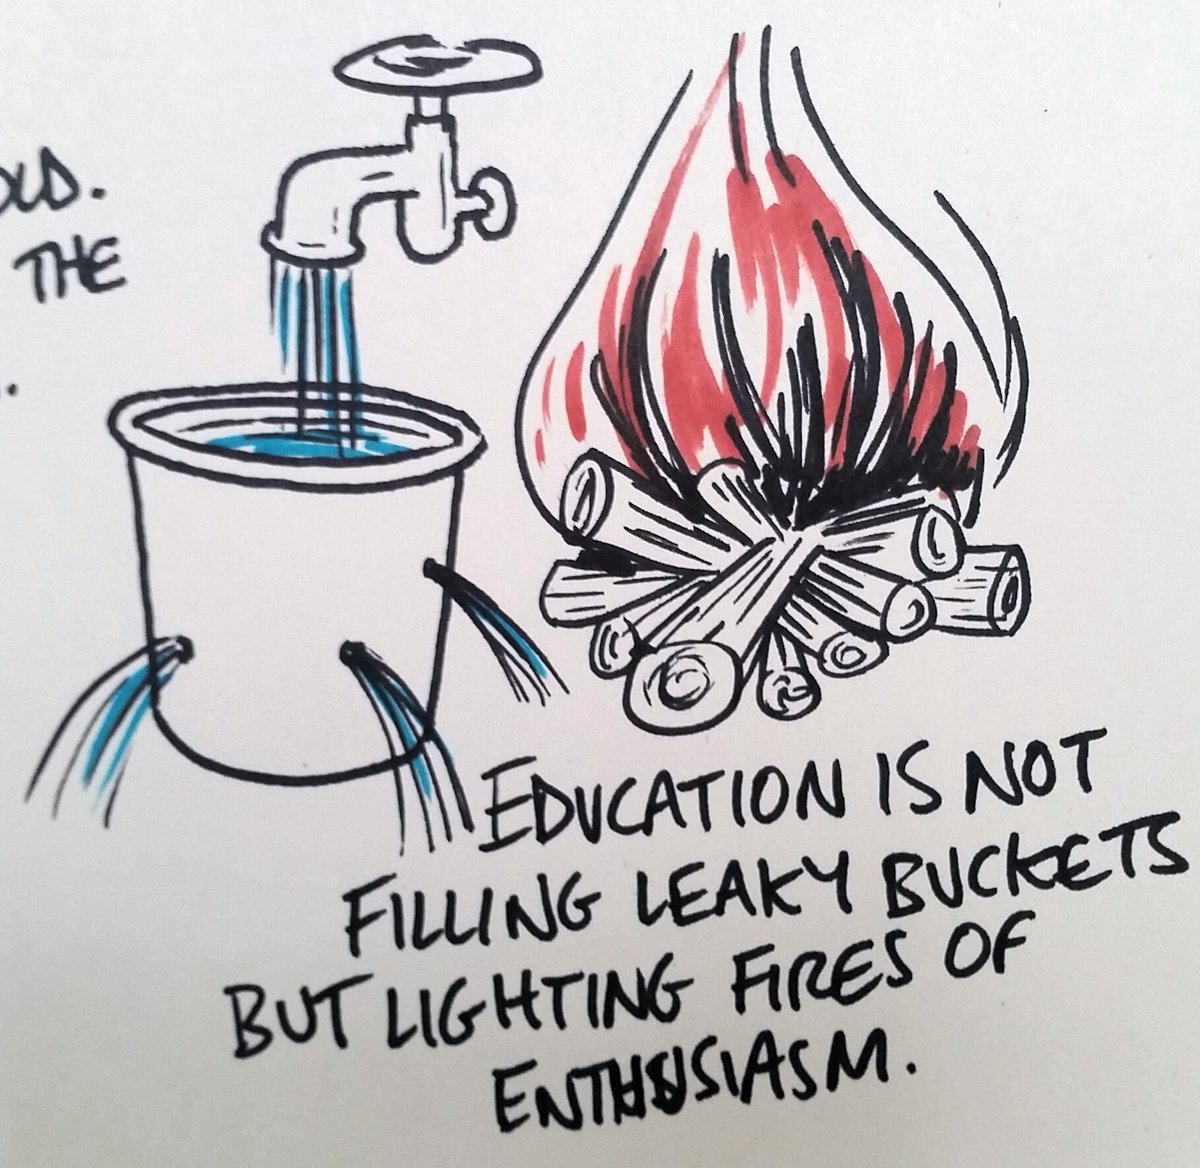 #HEASTEM16 "Education is not filling (leaky) buckets but lighting fires (of enthusiasm)" - Richard Self https://t.co/3eAg0DYYAz